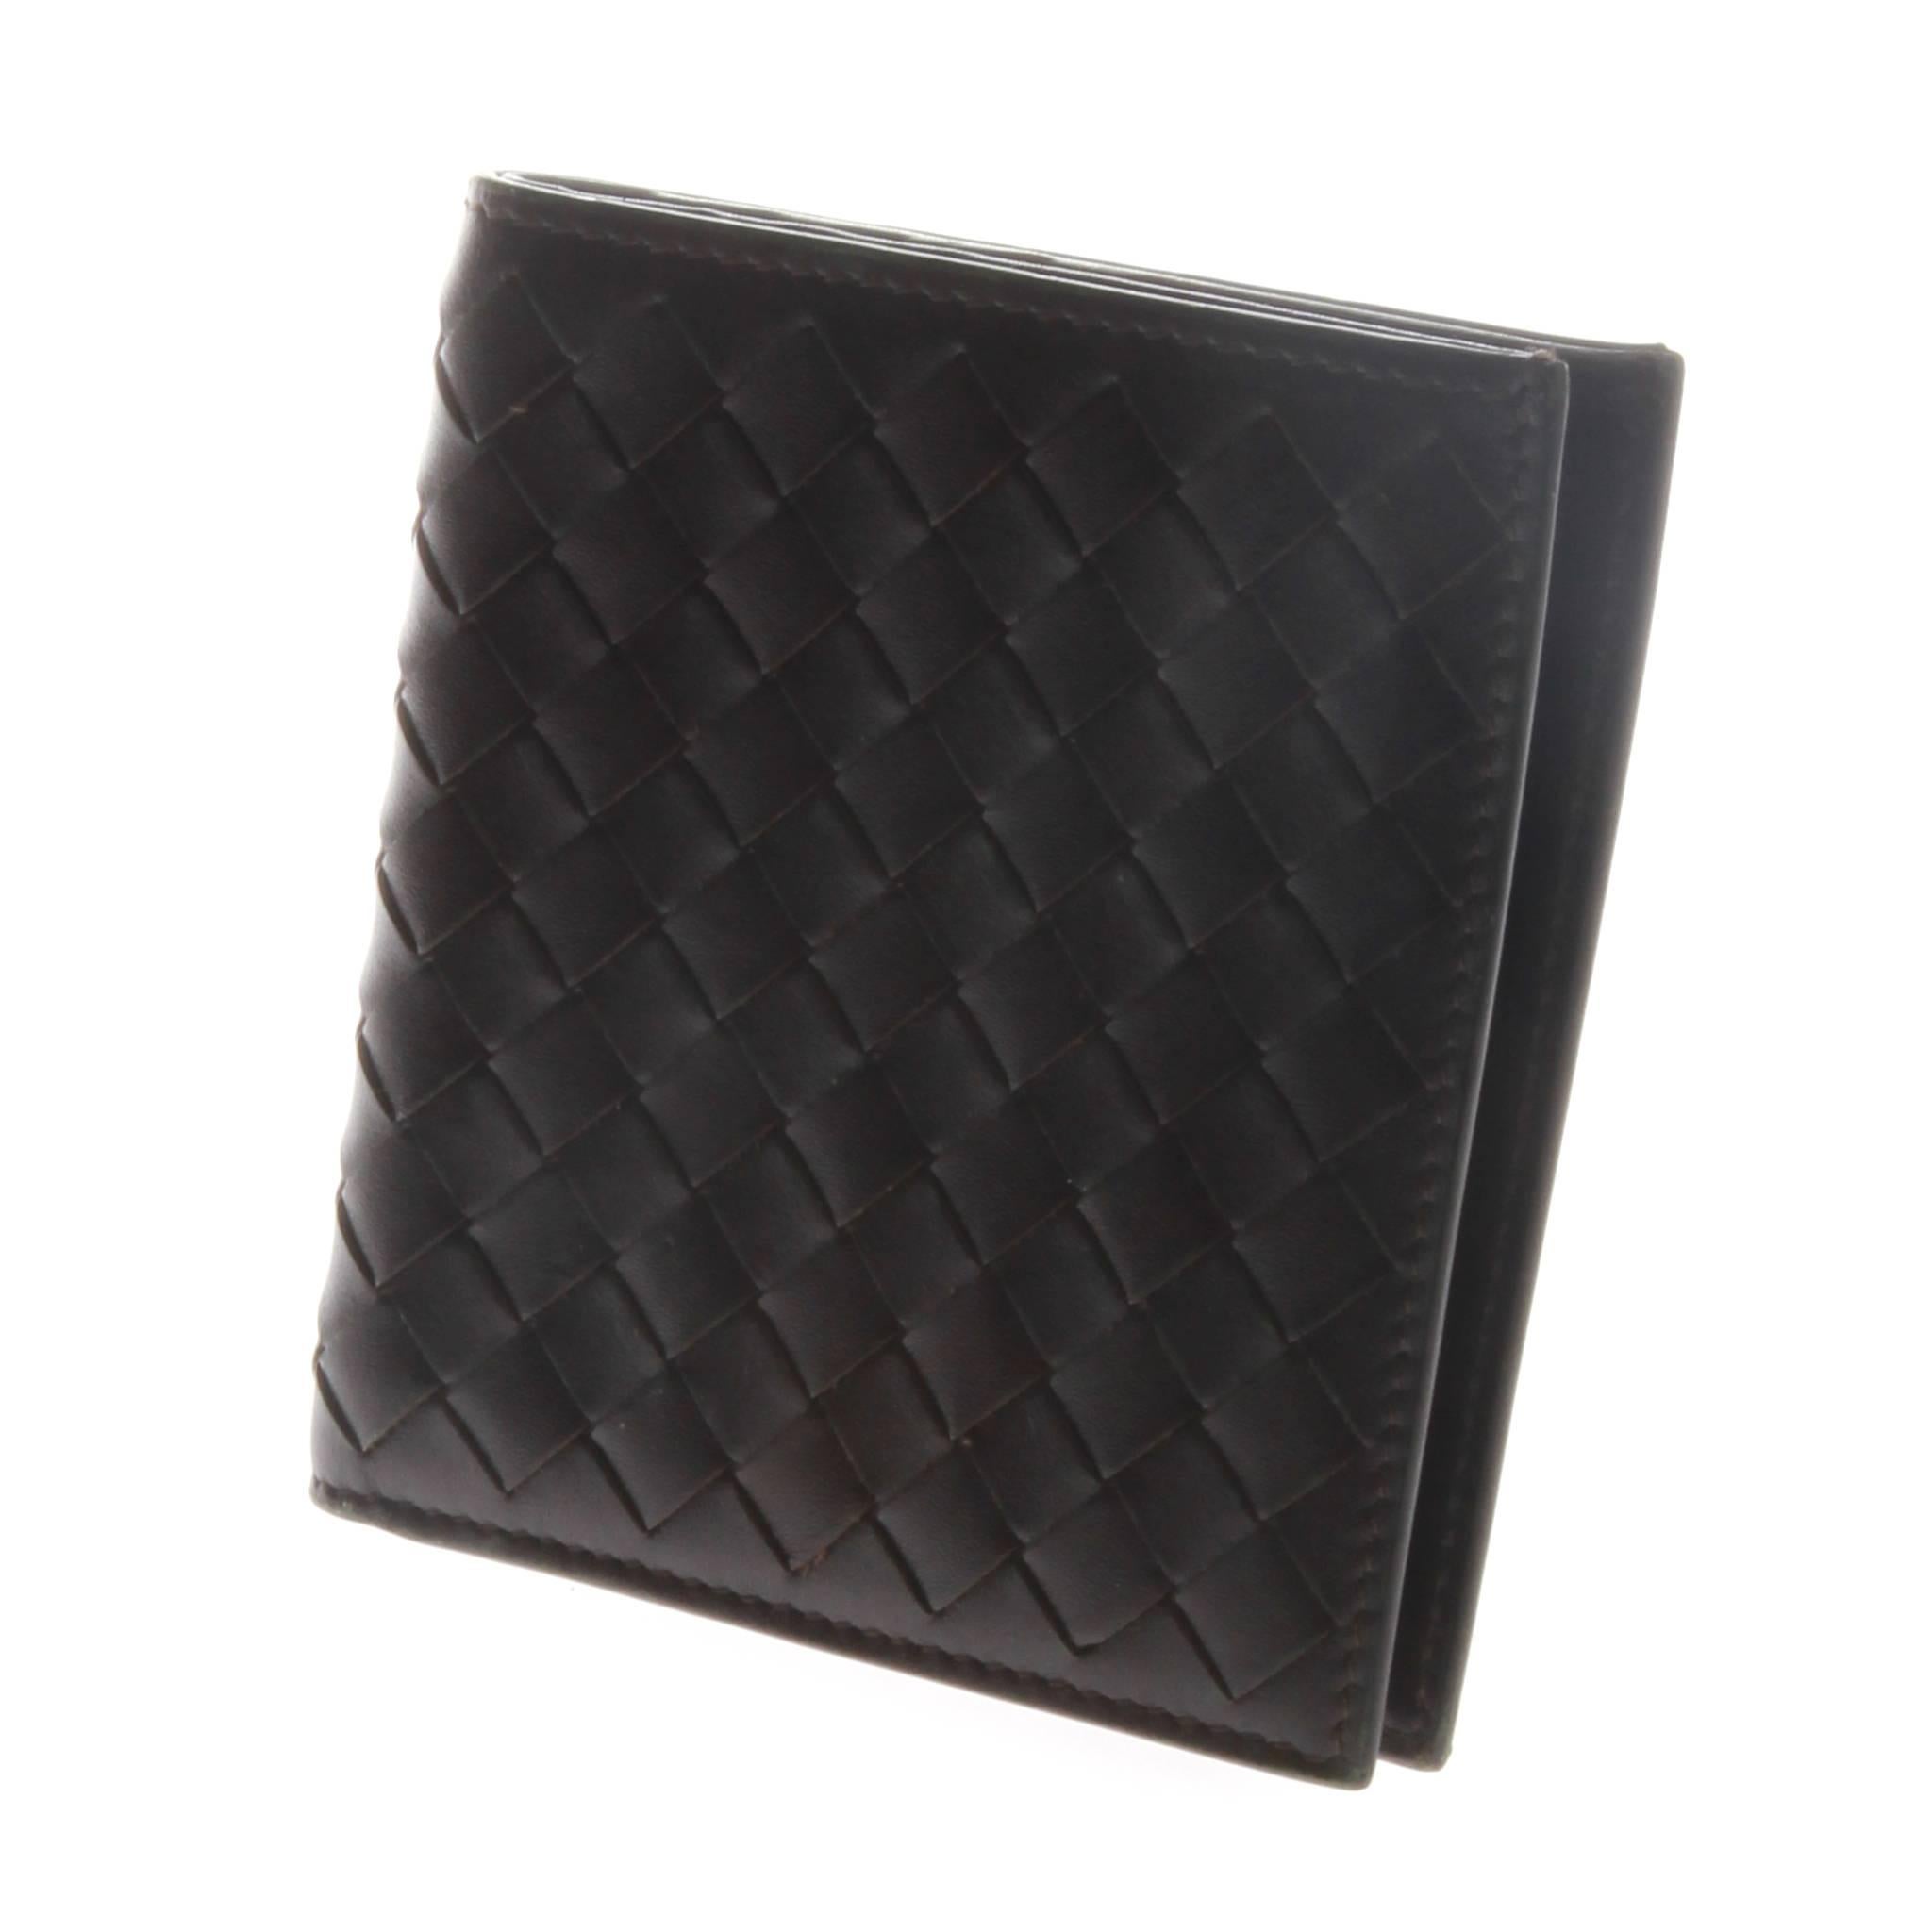 This classic bi-fold wallet is crafted of sleek calf leather featuring the signature intrecciato. 

The essential design is finished with a smooth leather interior and features 8 credit card slots, 4 compartments for organising bills and receipts